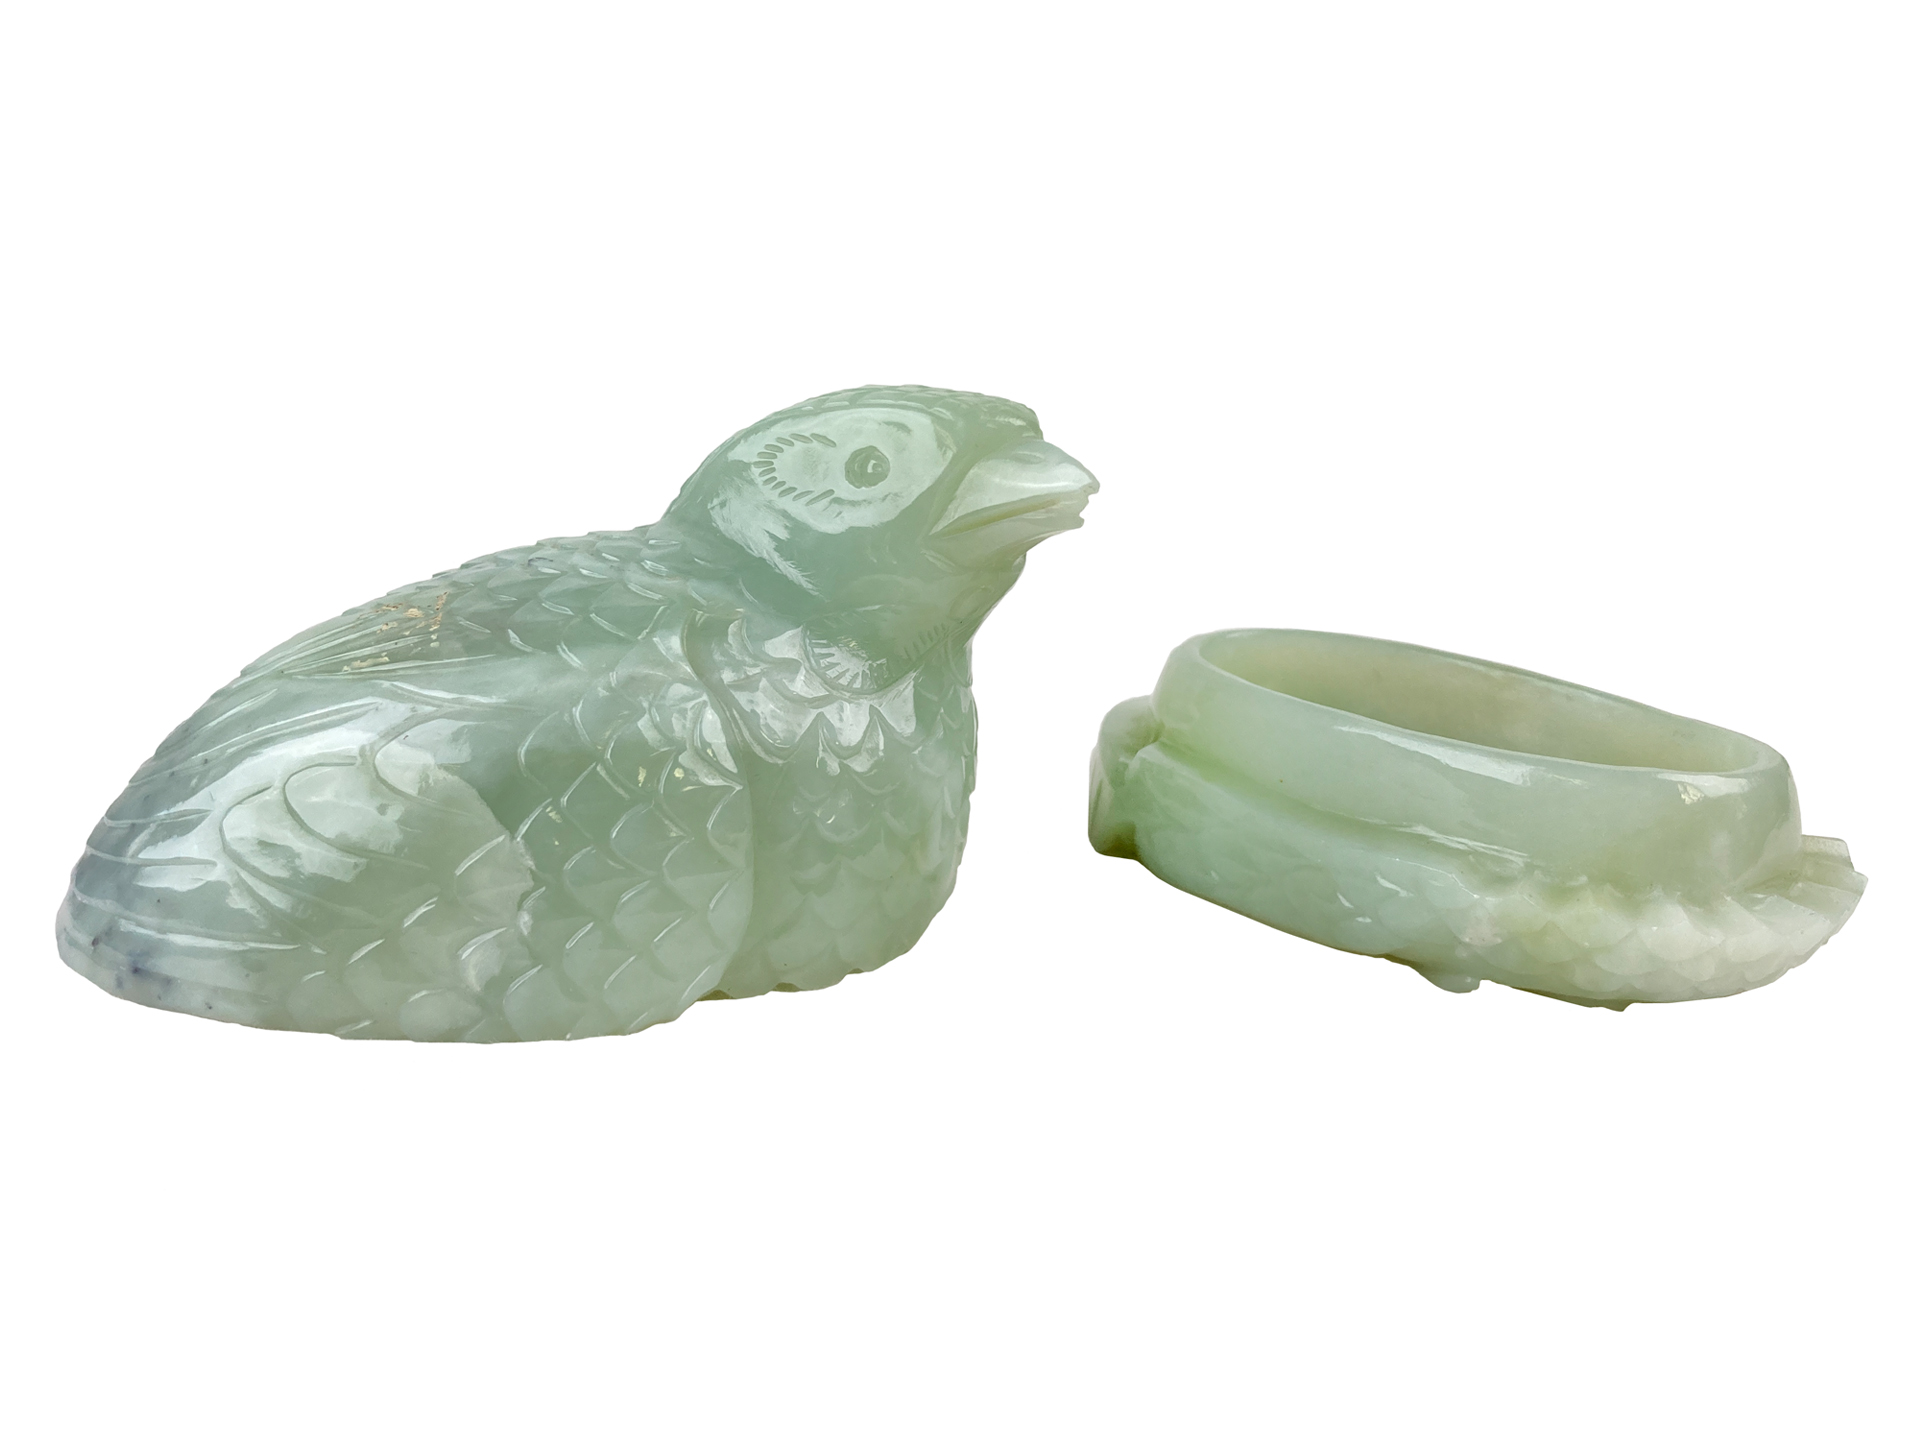 Chinese Carved Jade Boxes